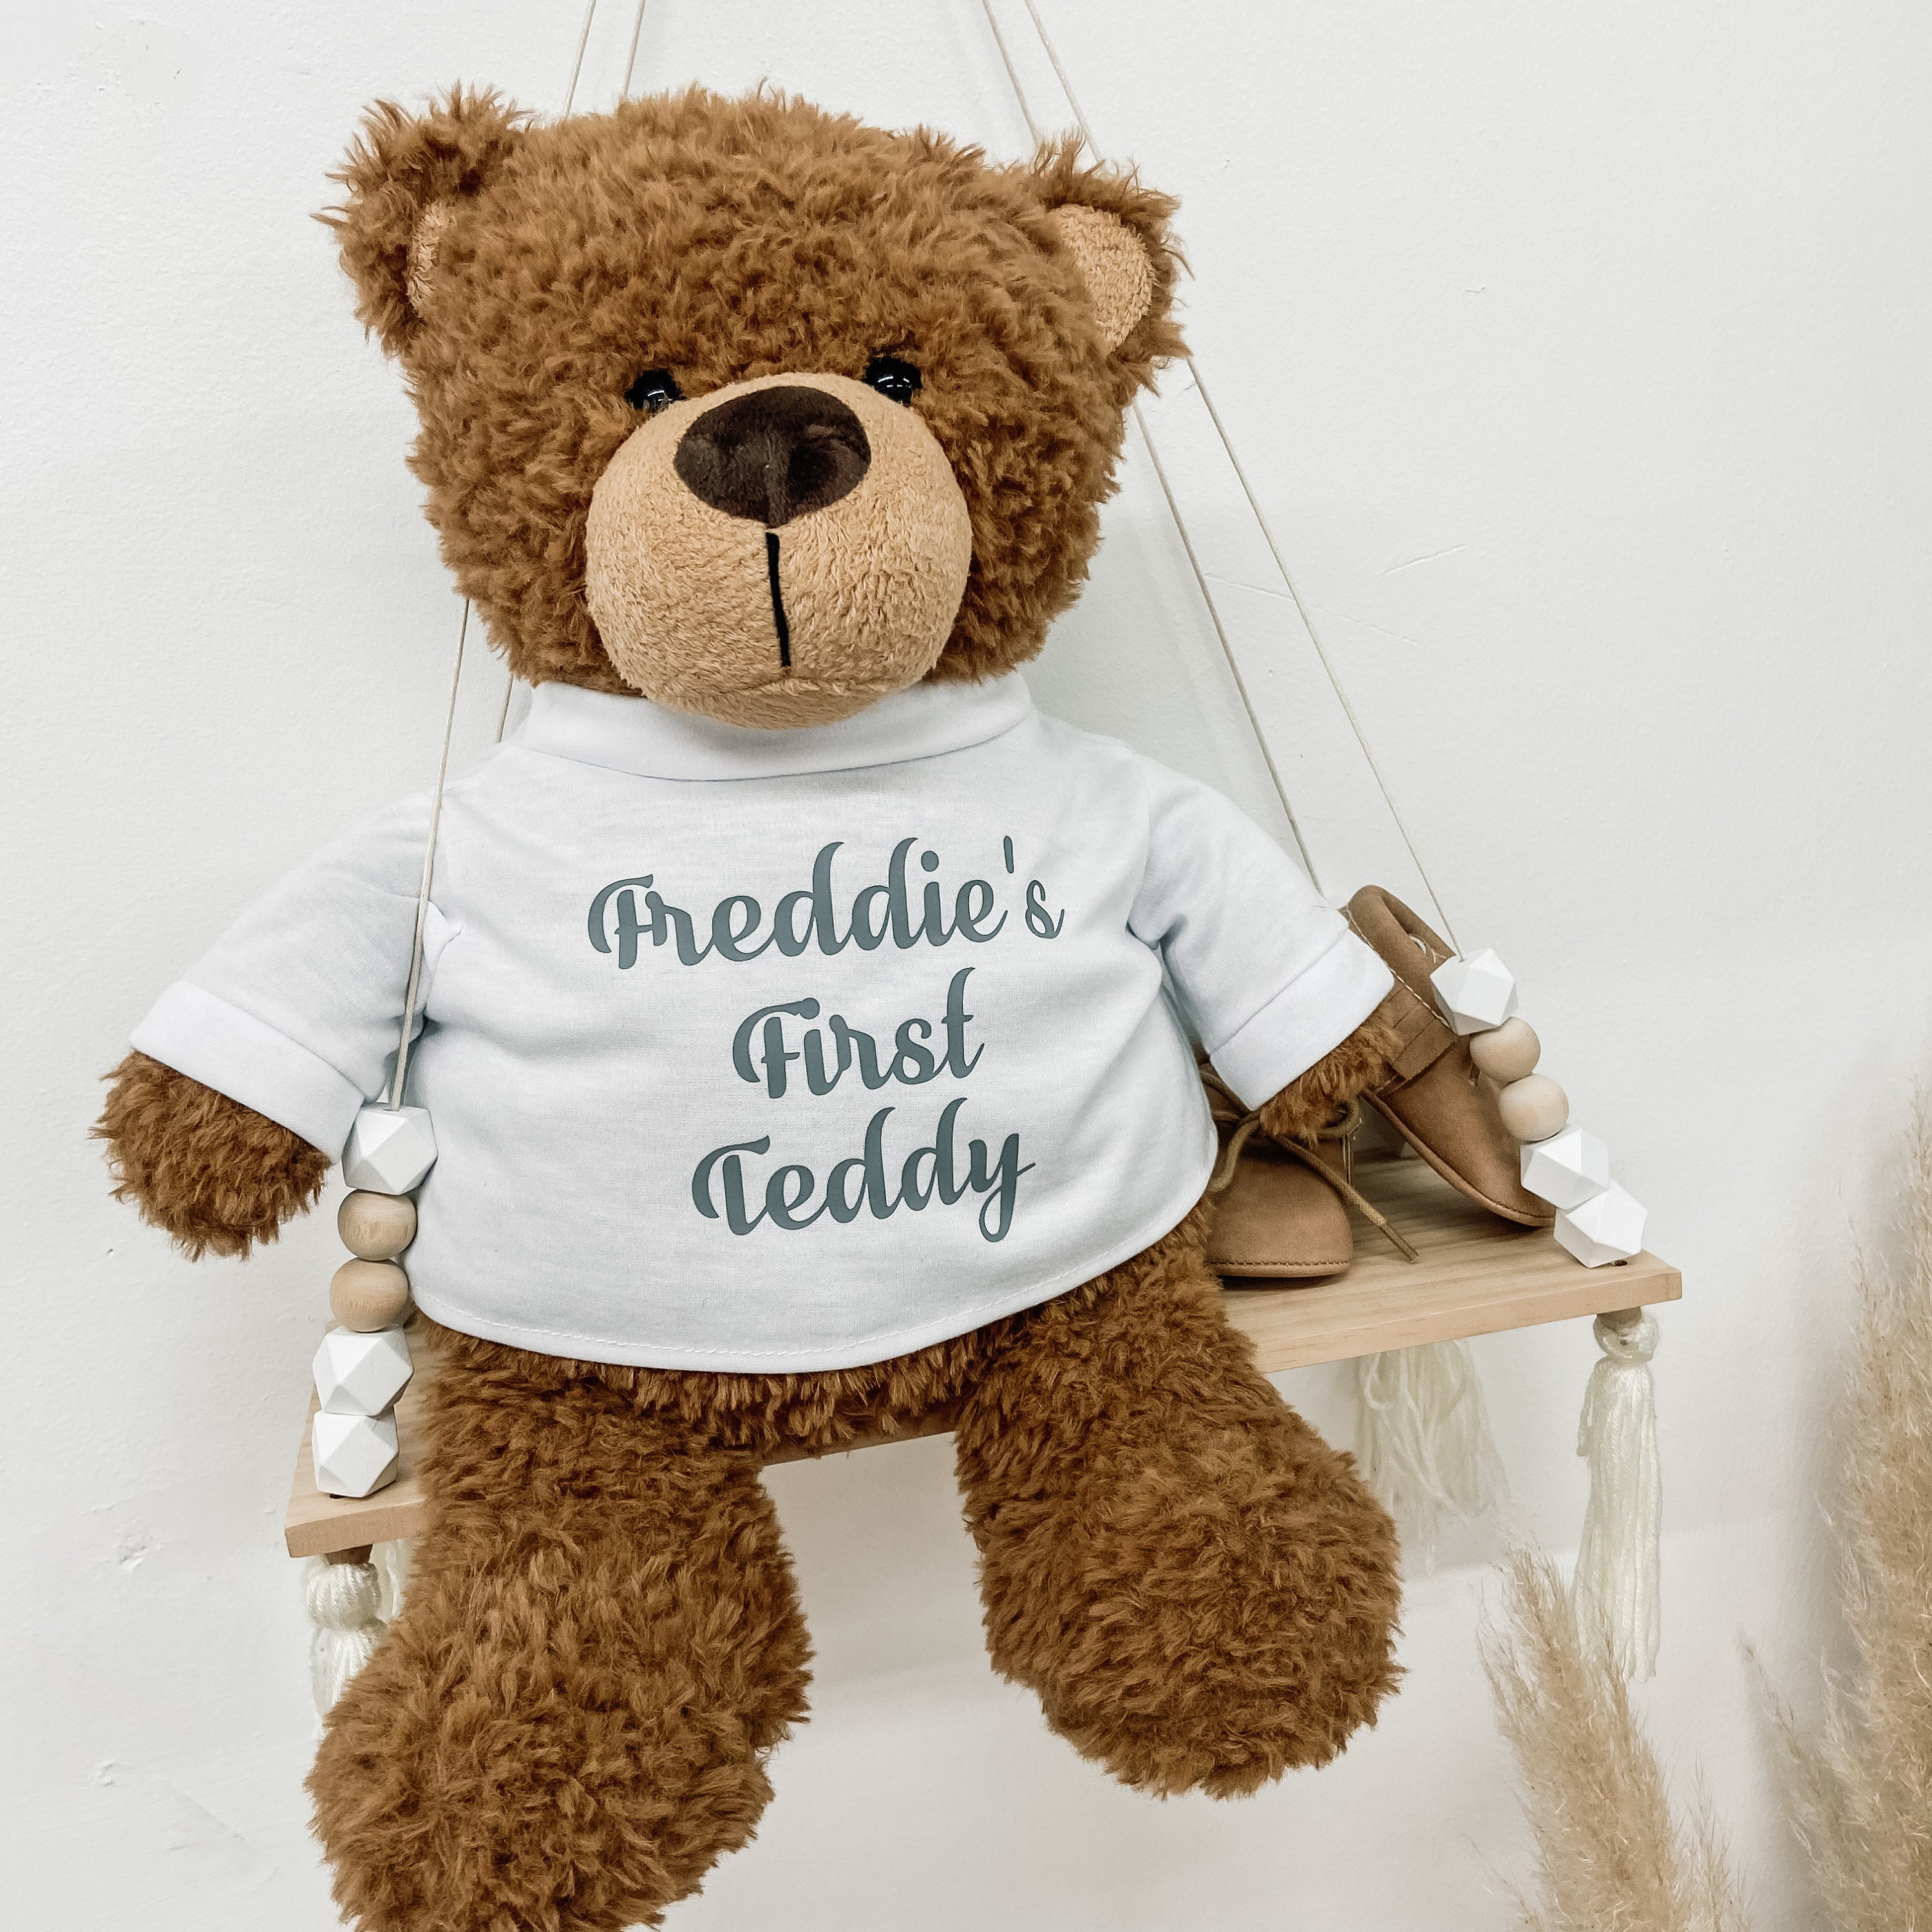 ETHAN-TB1 Adopted By ETHAN Teddy Bear Wearing a Personalised Name T-Shirt 